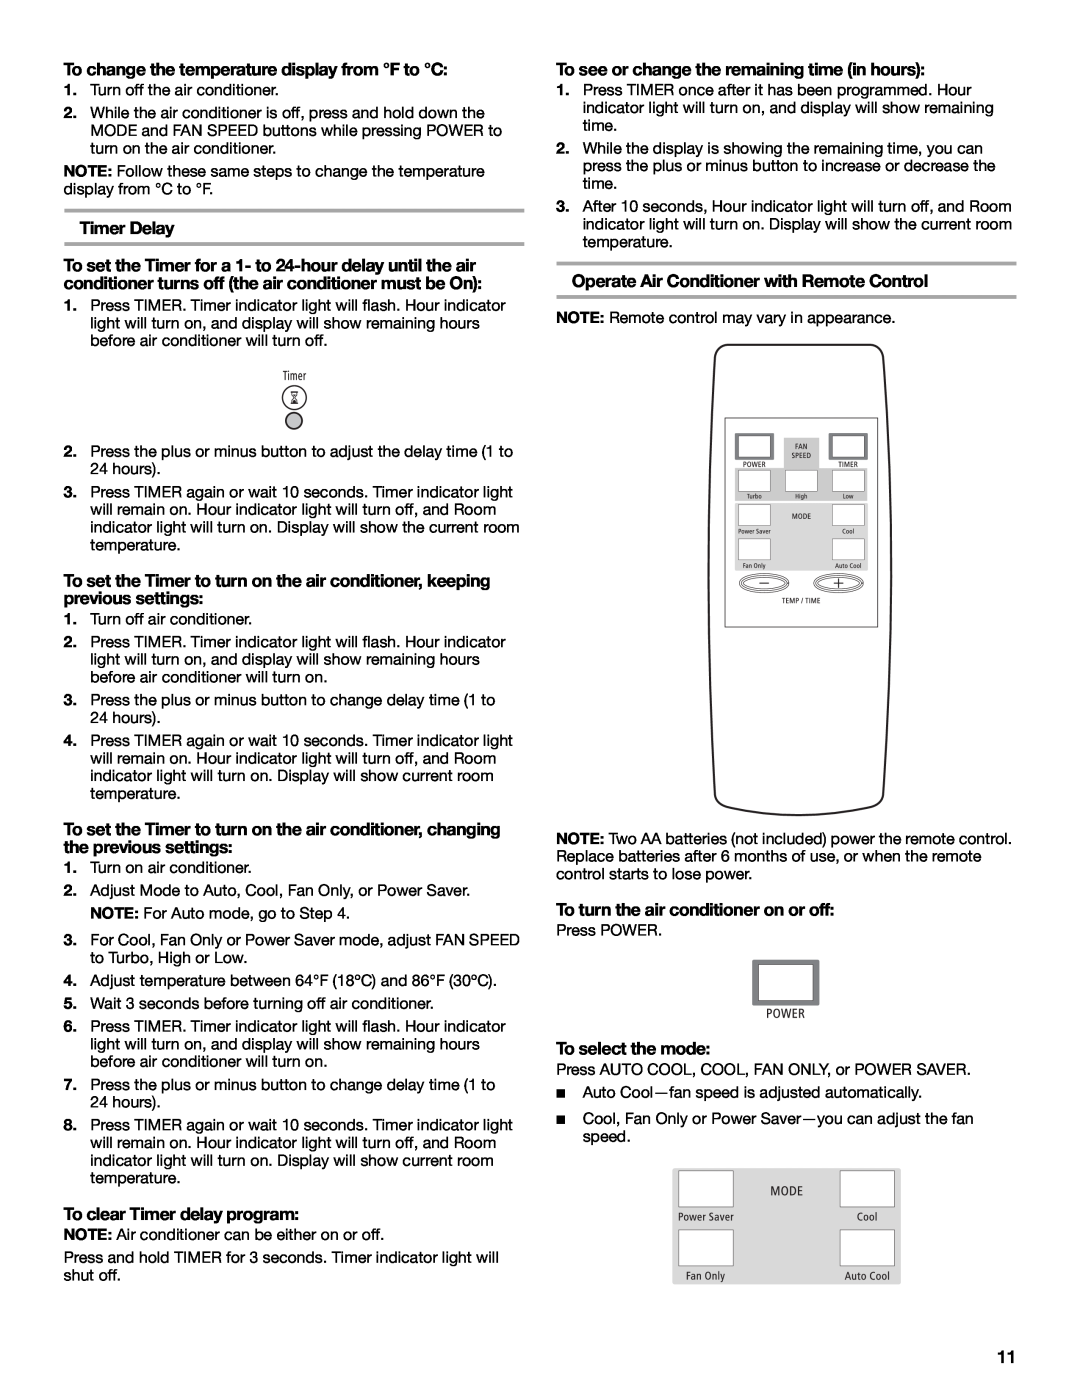 Whirlpool ACC082XR0 manual To change the temperature display from F to C, Timer Delay, To clear Timer delay program 